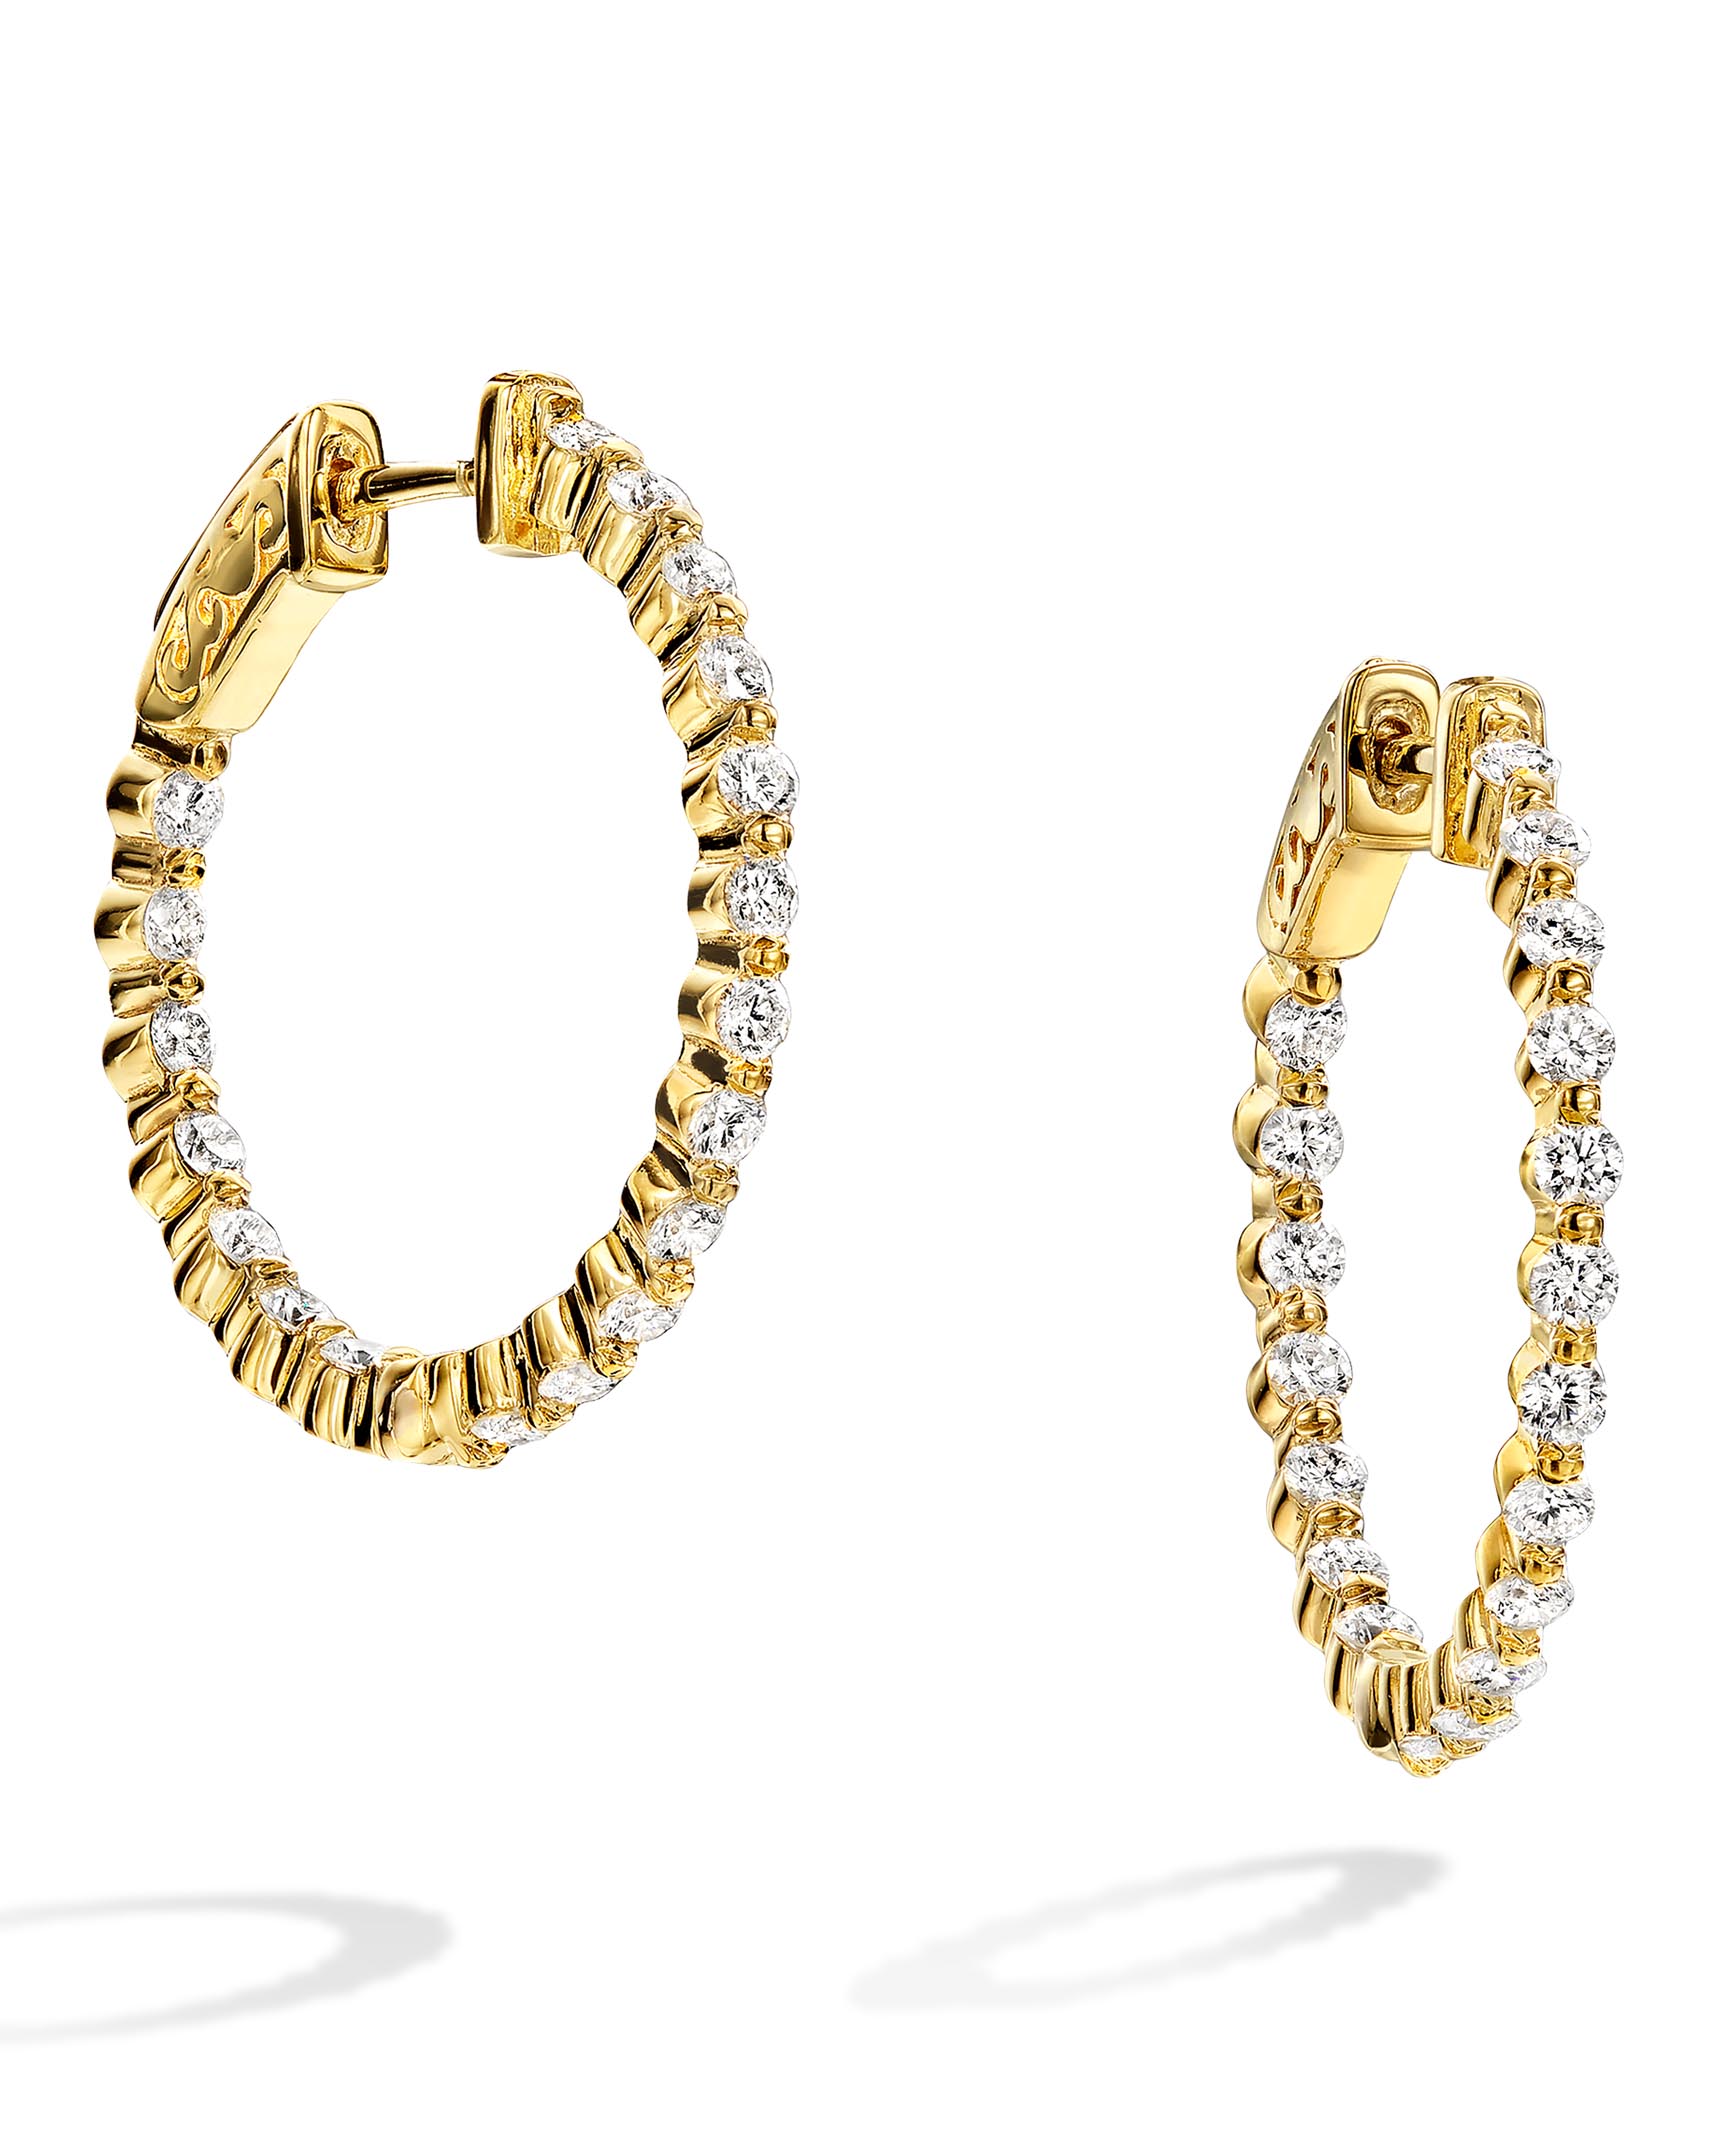 Yellow Gold and Diamond Inside and Out Hoop Earrings - Turgeon Raine